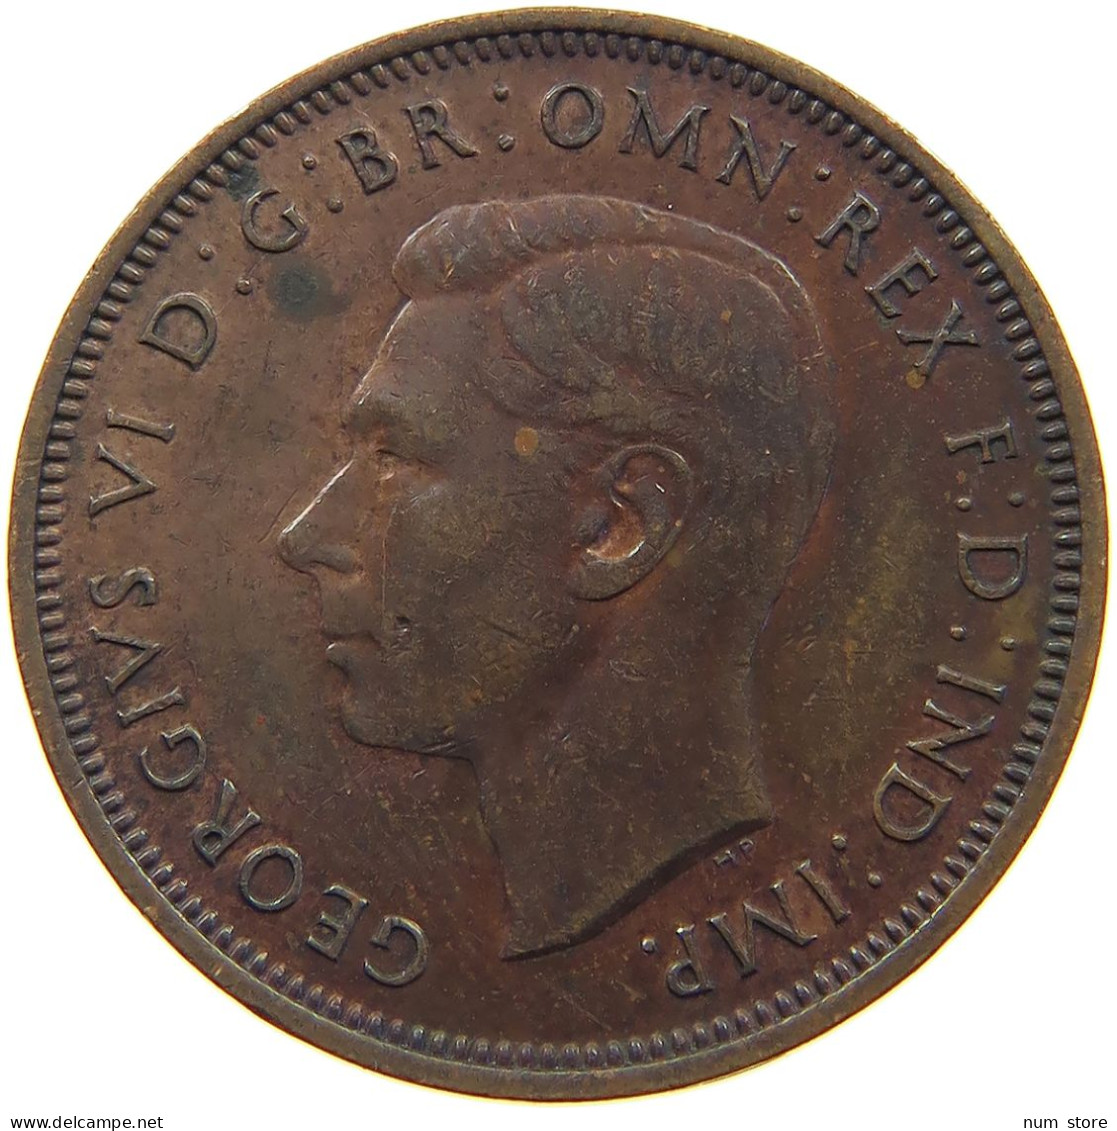 GREAT BRITAIN HALFPENNY 1945 #a066 0237 - C. 1/2 Penny